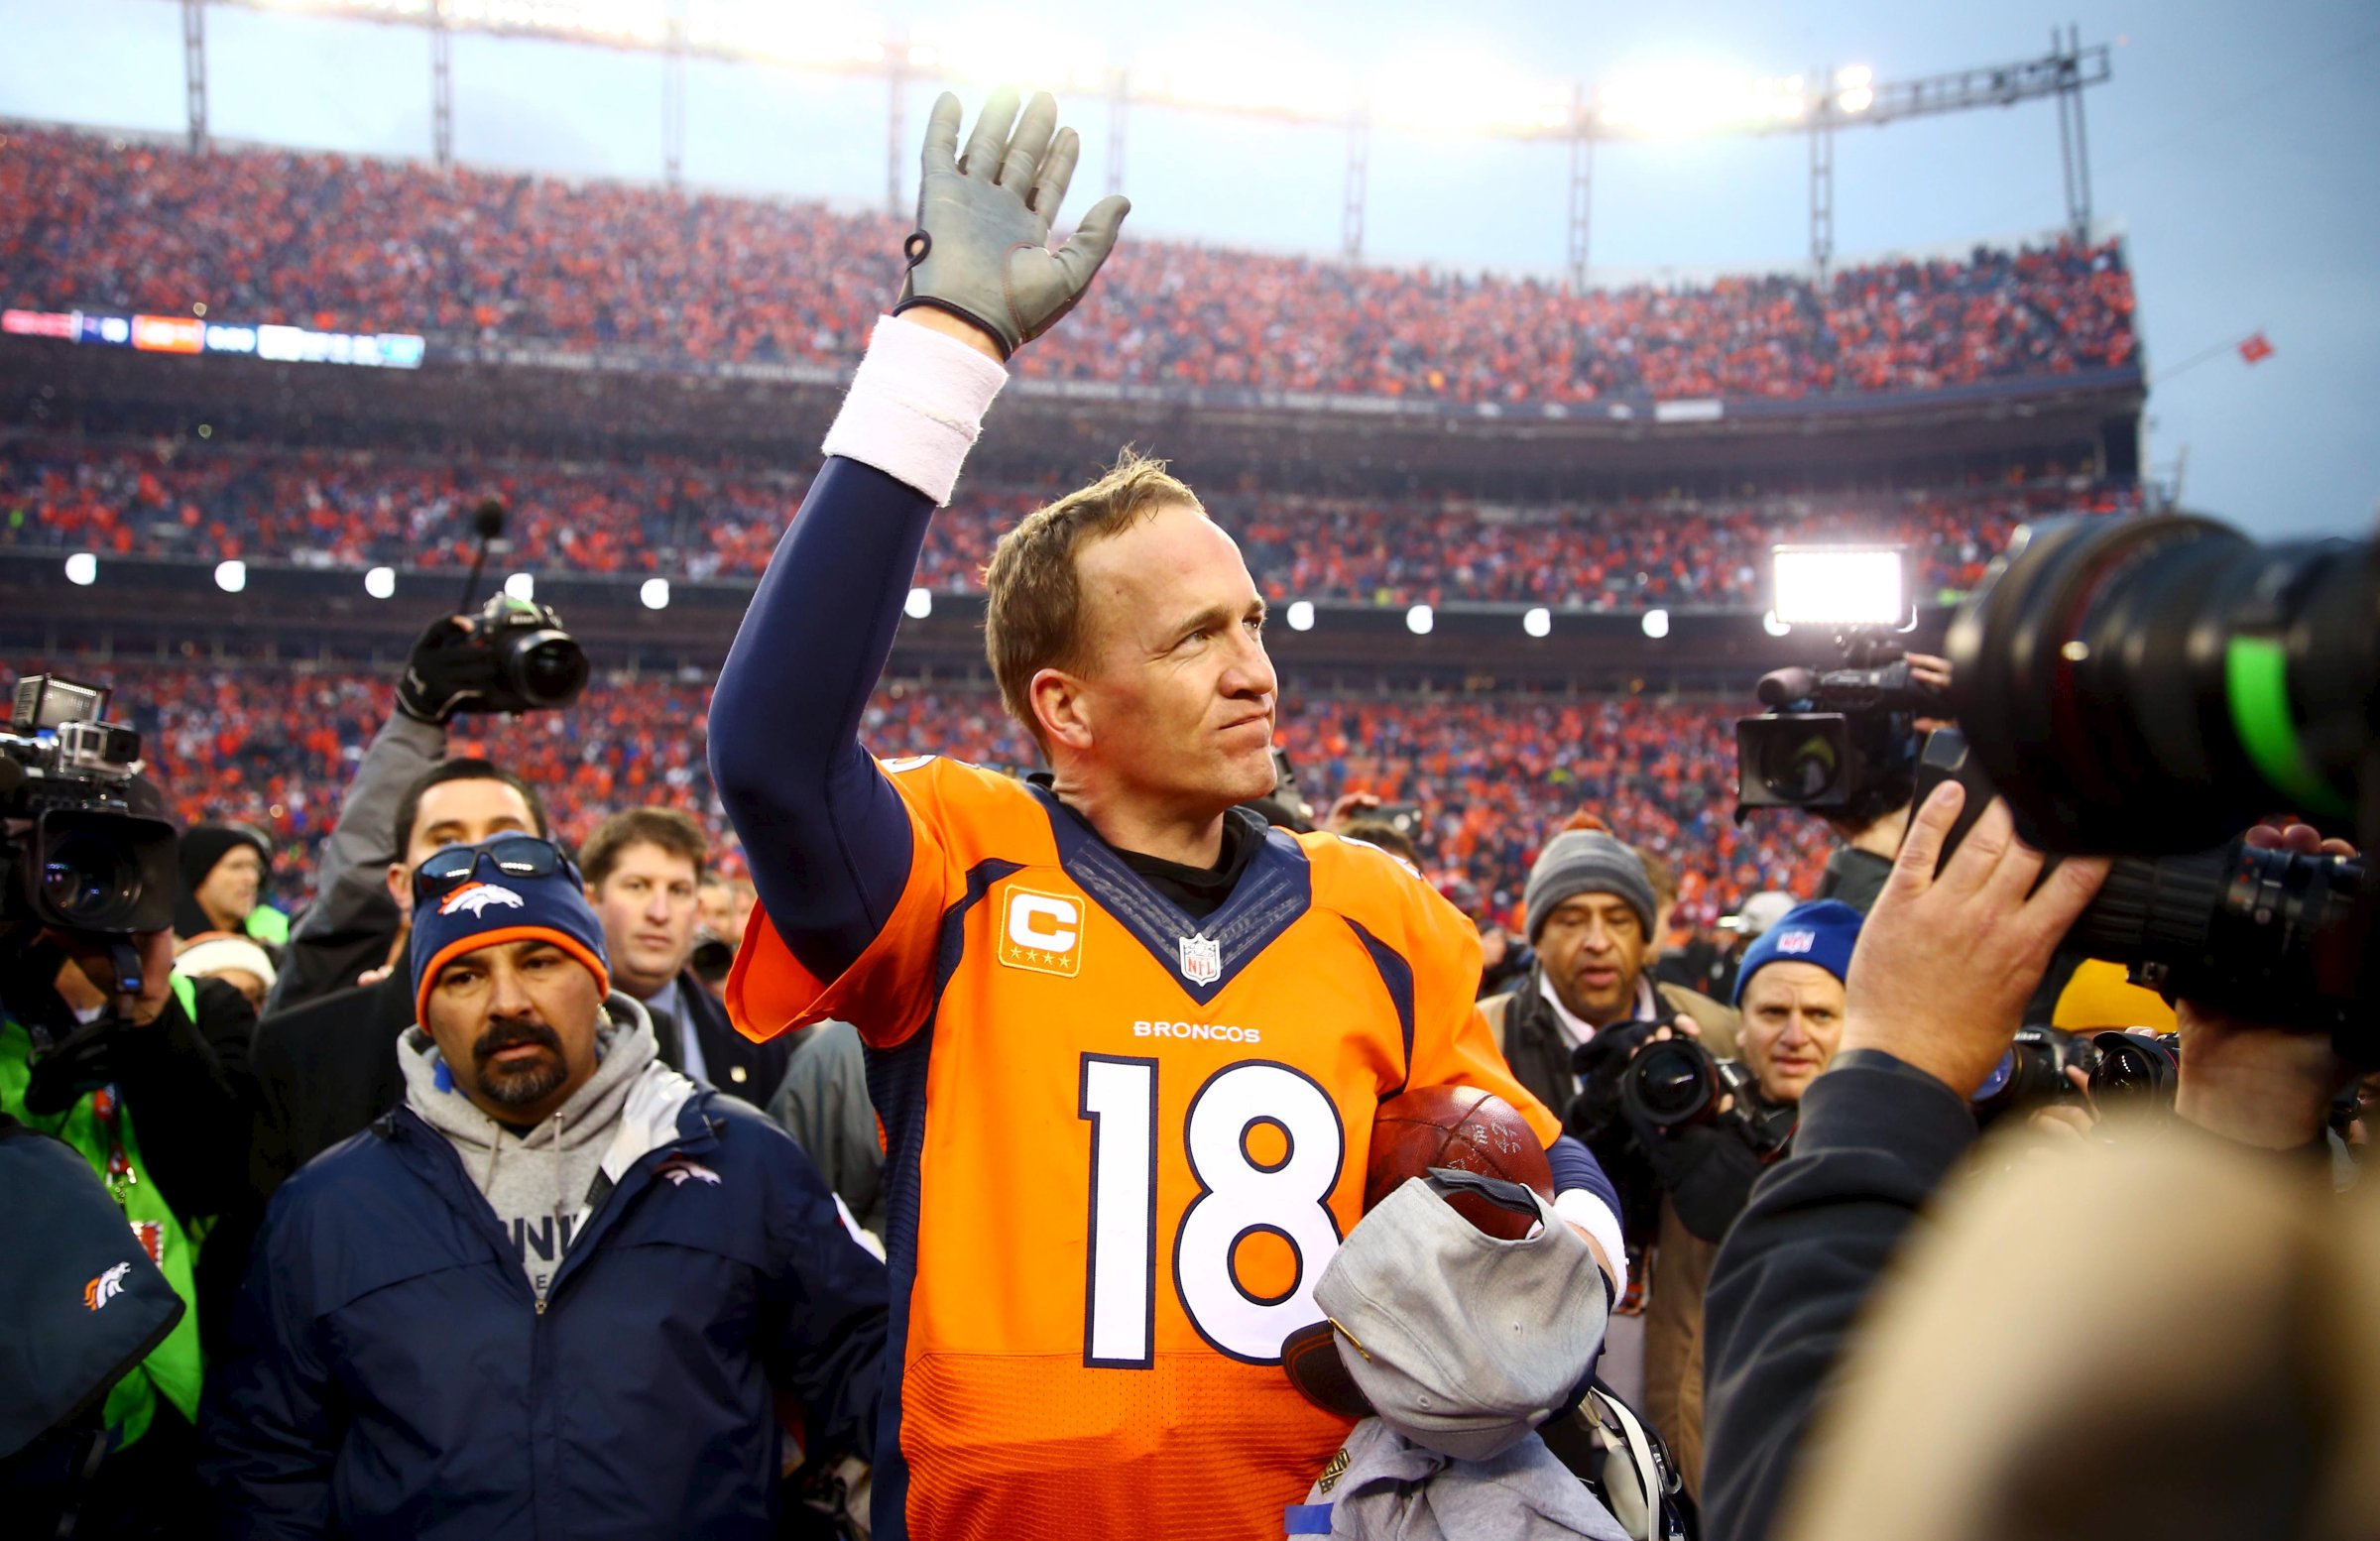 Denver Broncos quarterback Peyton Manning waves to the crowd after the AFC Championship football game against the New England Patriots at Sports Authority Field at Mile High in Denver, CO on Jan 24, 2016.